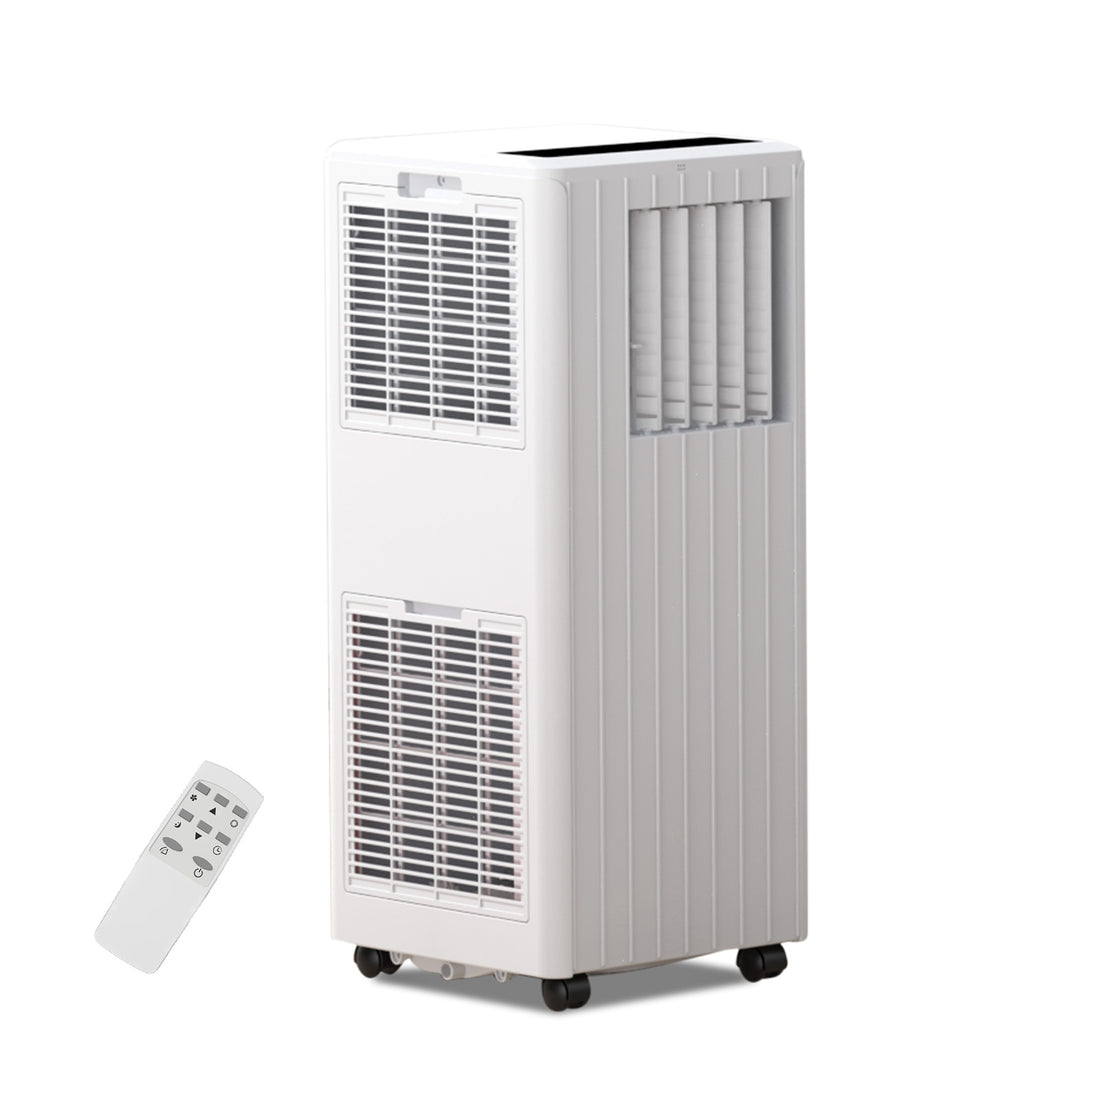 GARVEE 8000 BTU Portable Air Conditioner 3-in-1 Portable Conditioner with Remote Control 2 Speeds Cools Room Up to 350 Sq.Ft